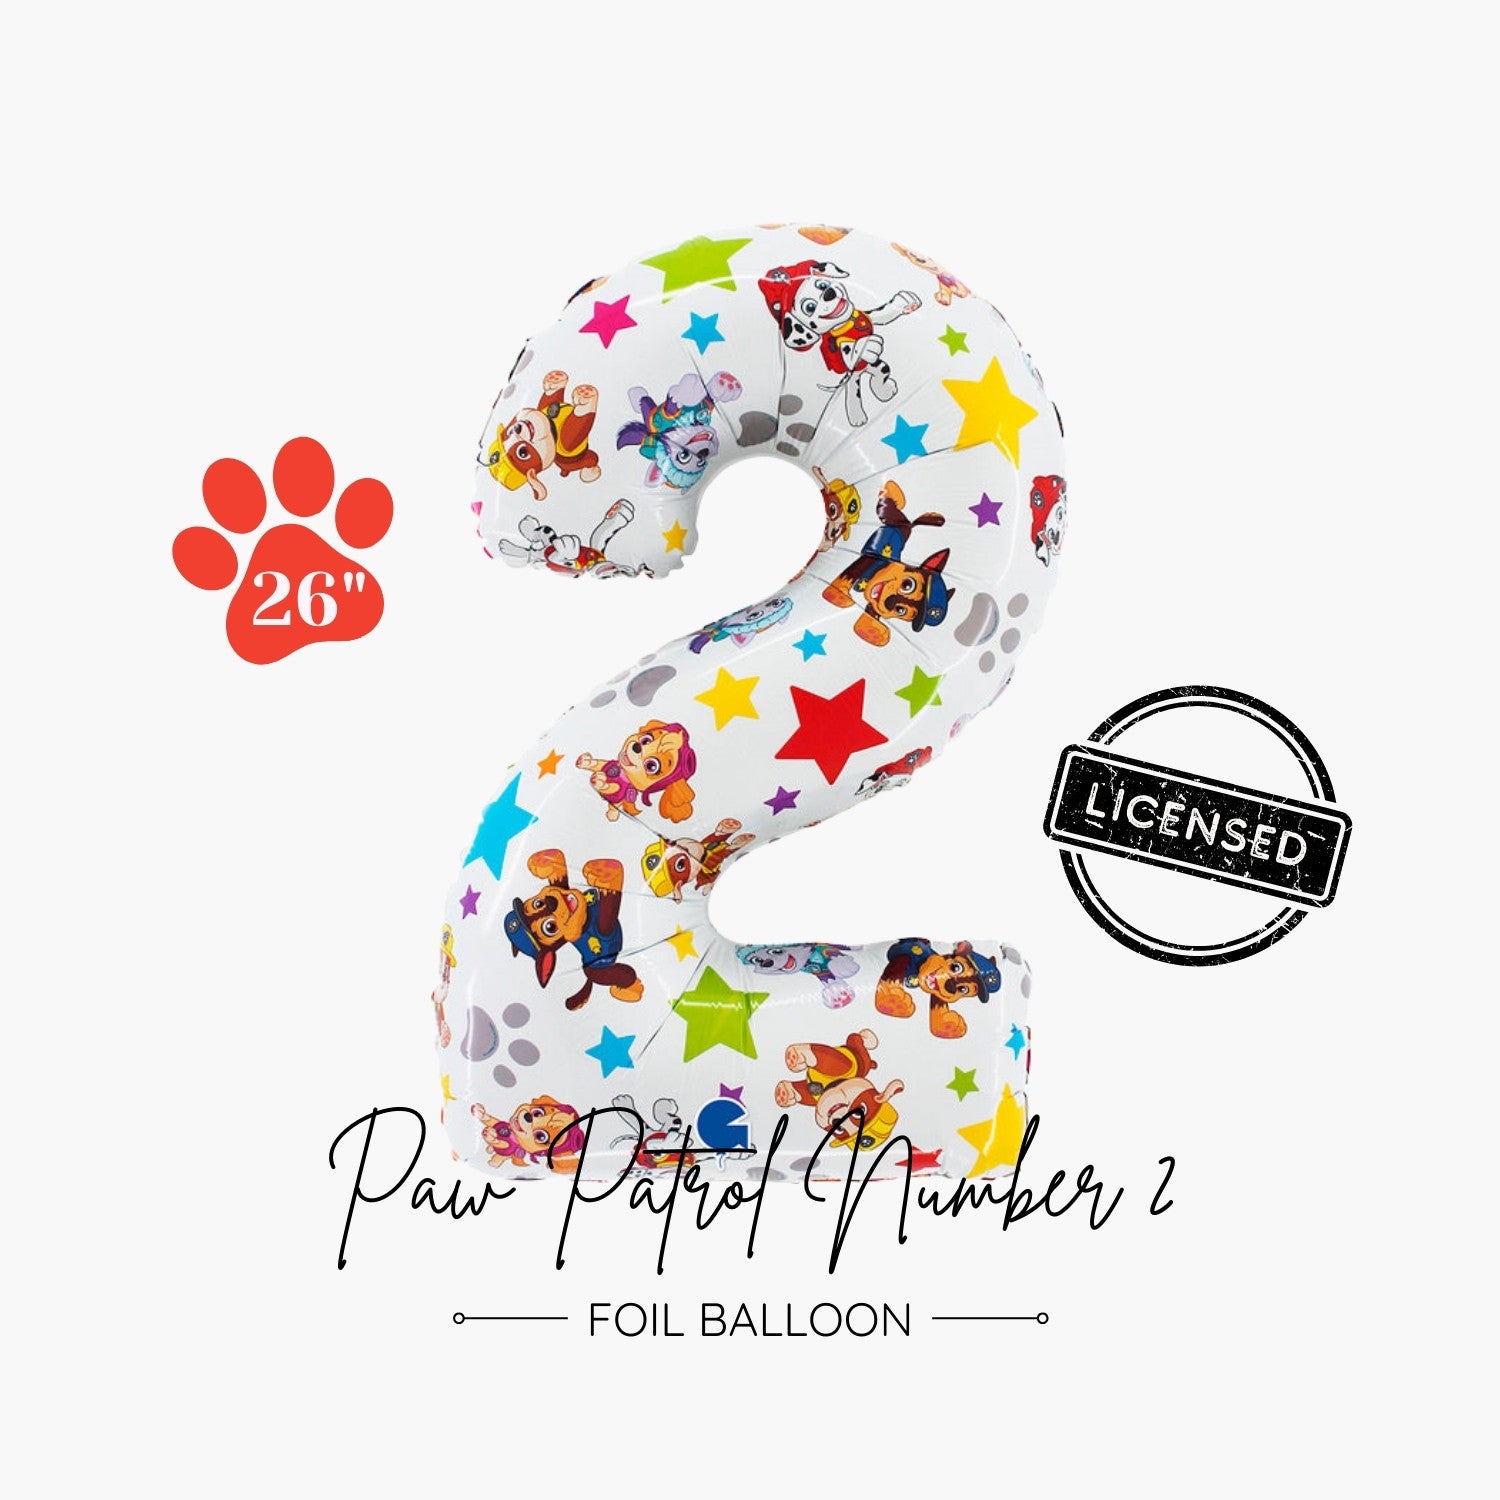 Licensed Paw Patrol Number 2 Foil Balloon 26" - Paw Patrol Second Birthday Party Decorations